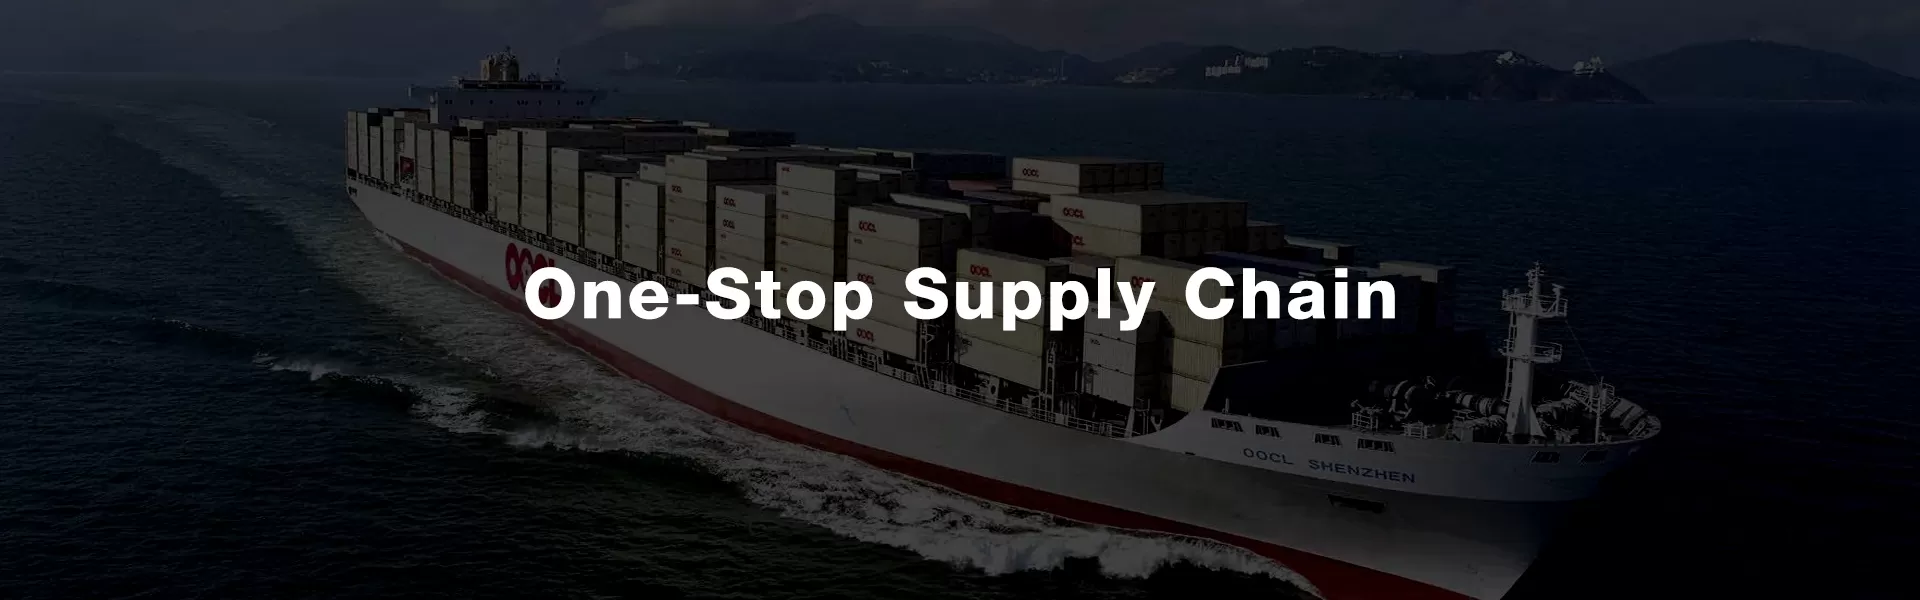 One-Stop Supply Chain